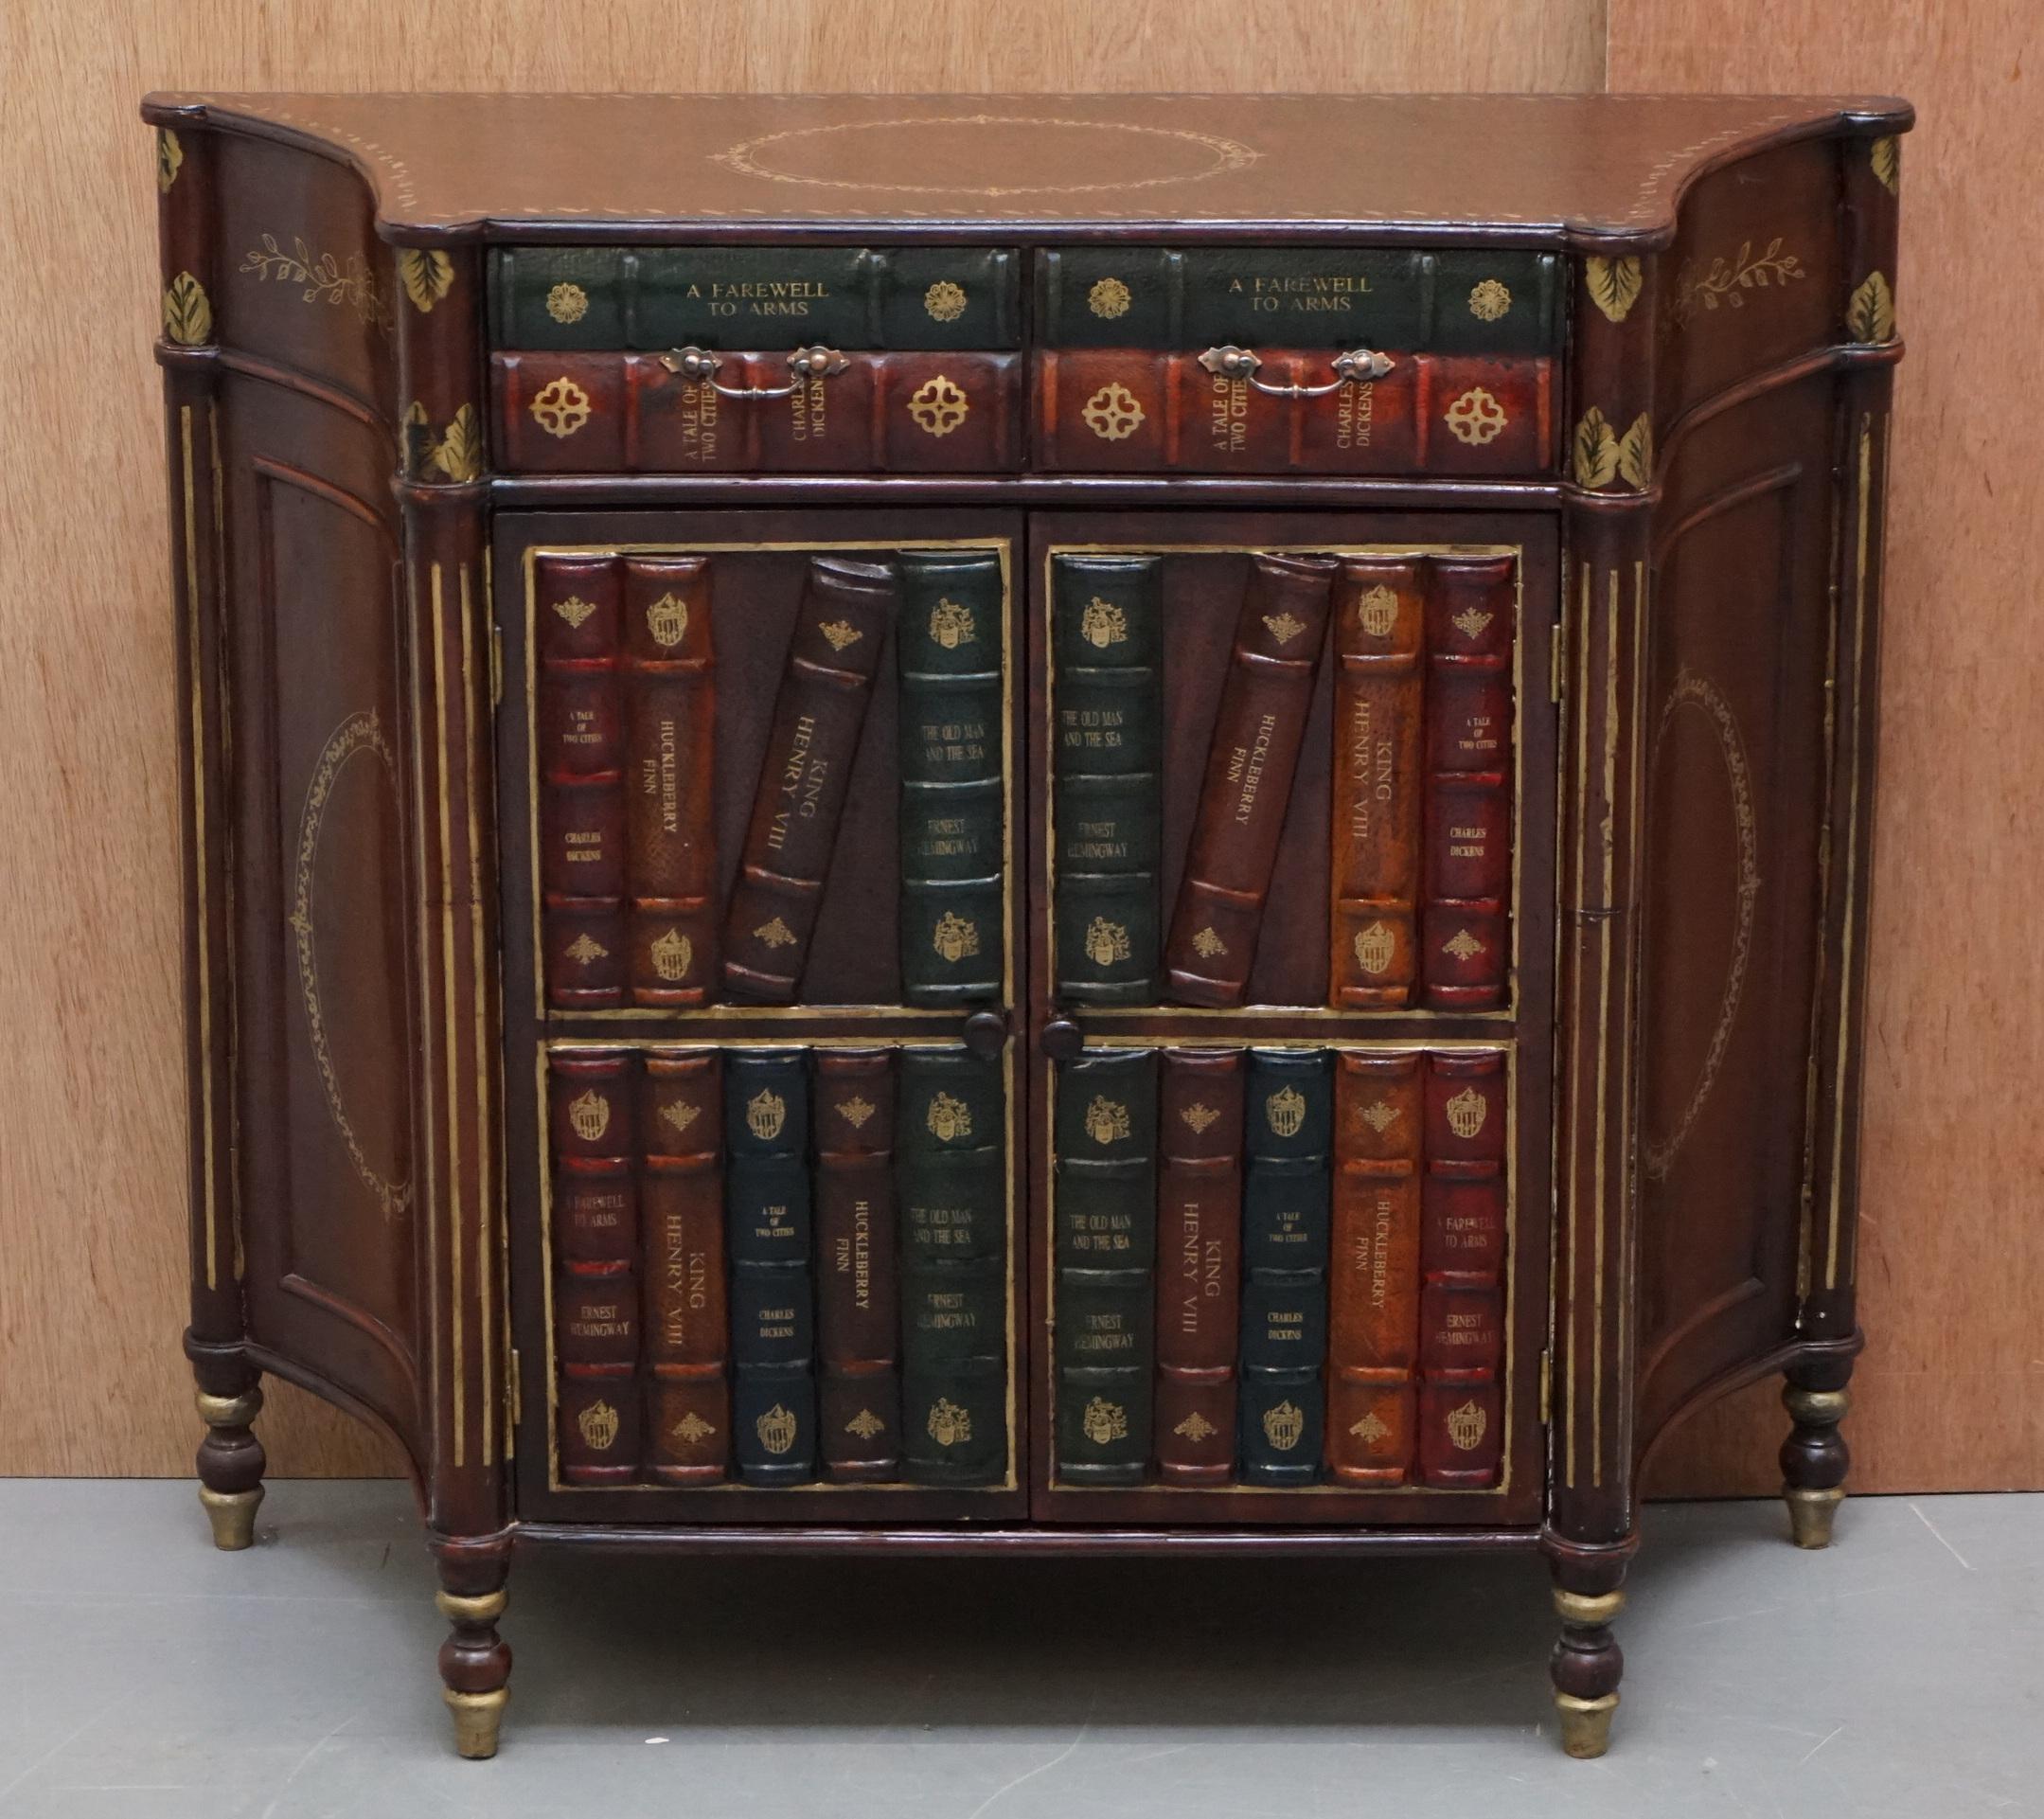 We are delighted to offer for sale this lovely vintage Faux Book library or study small sideboard with twin drawers

A good looking and well made piece, the faux book style dates back to the early Victorian era and was a great way to hide precious